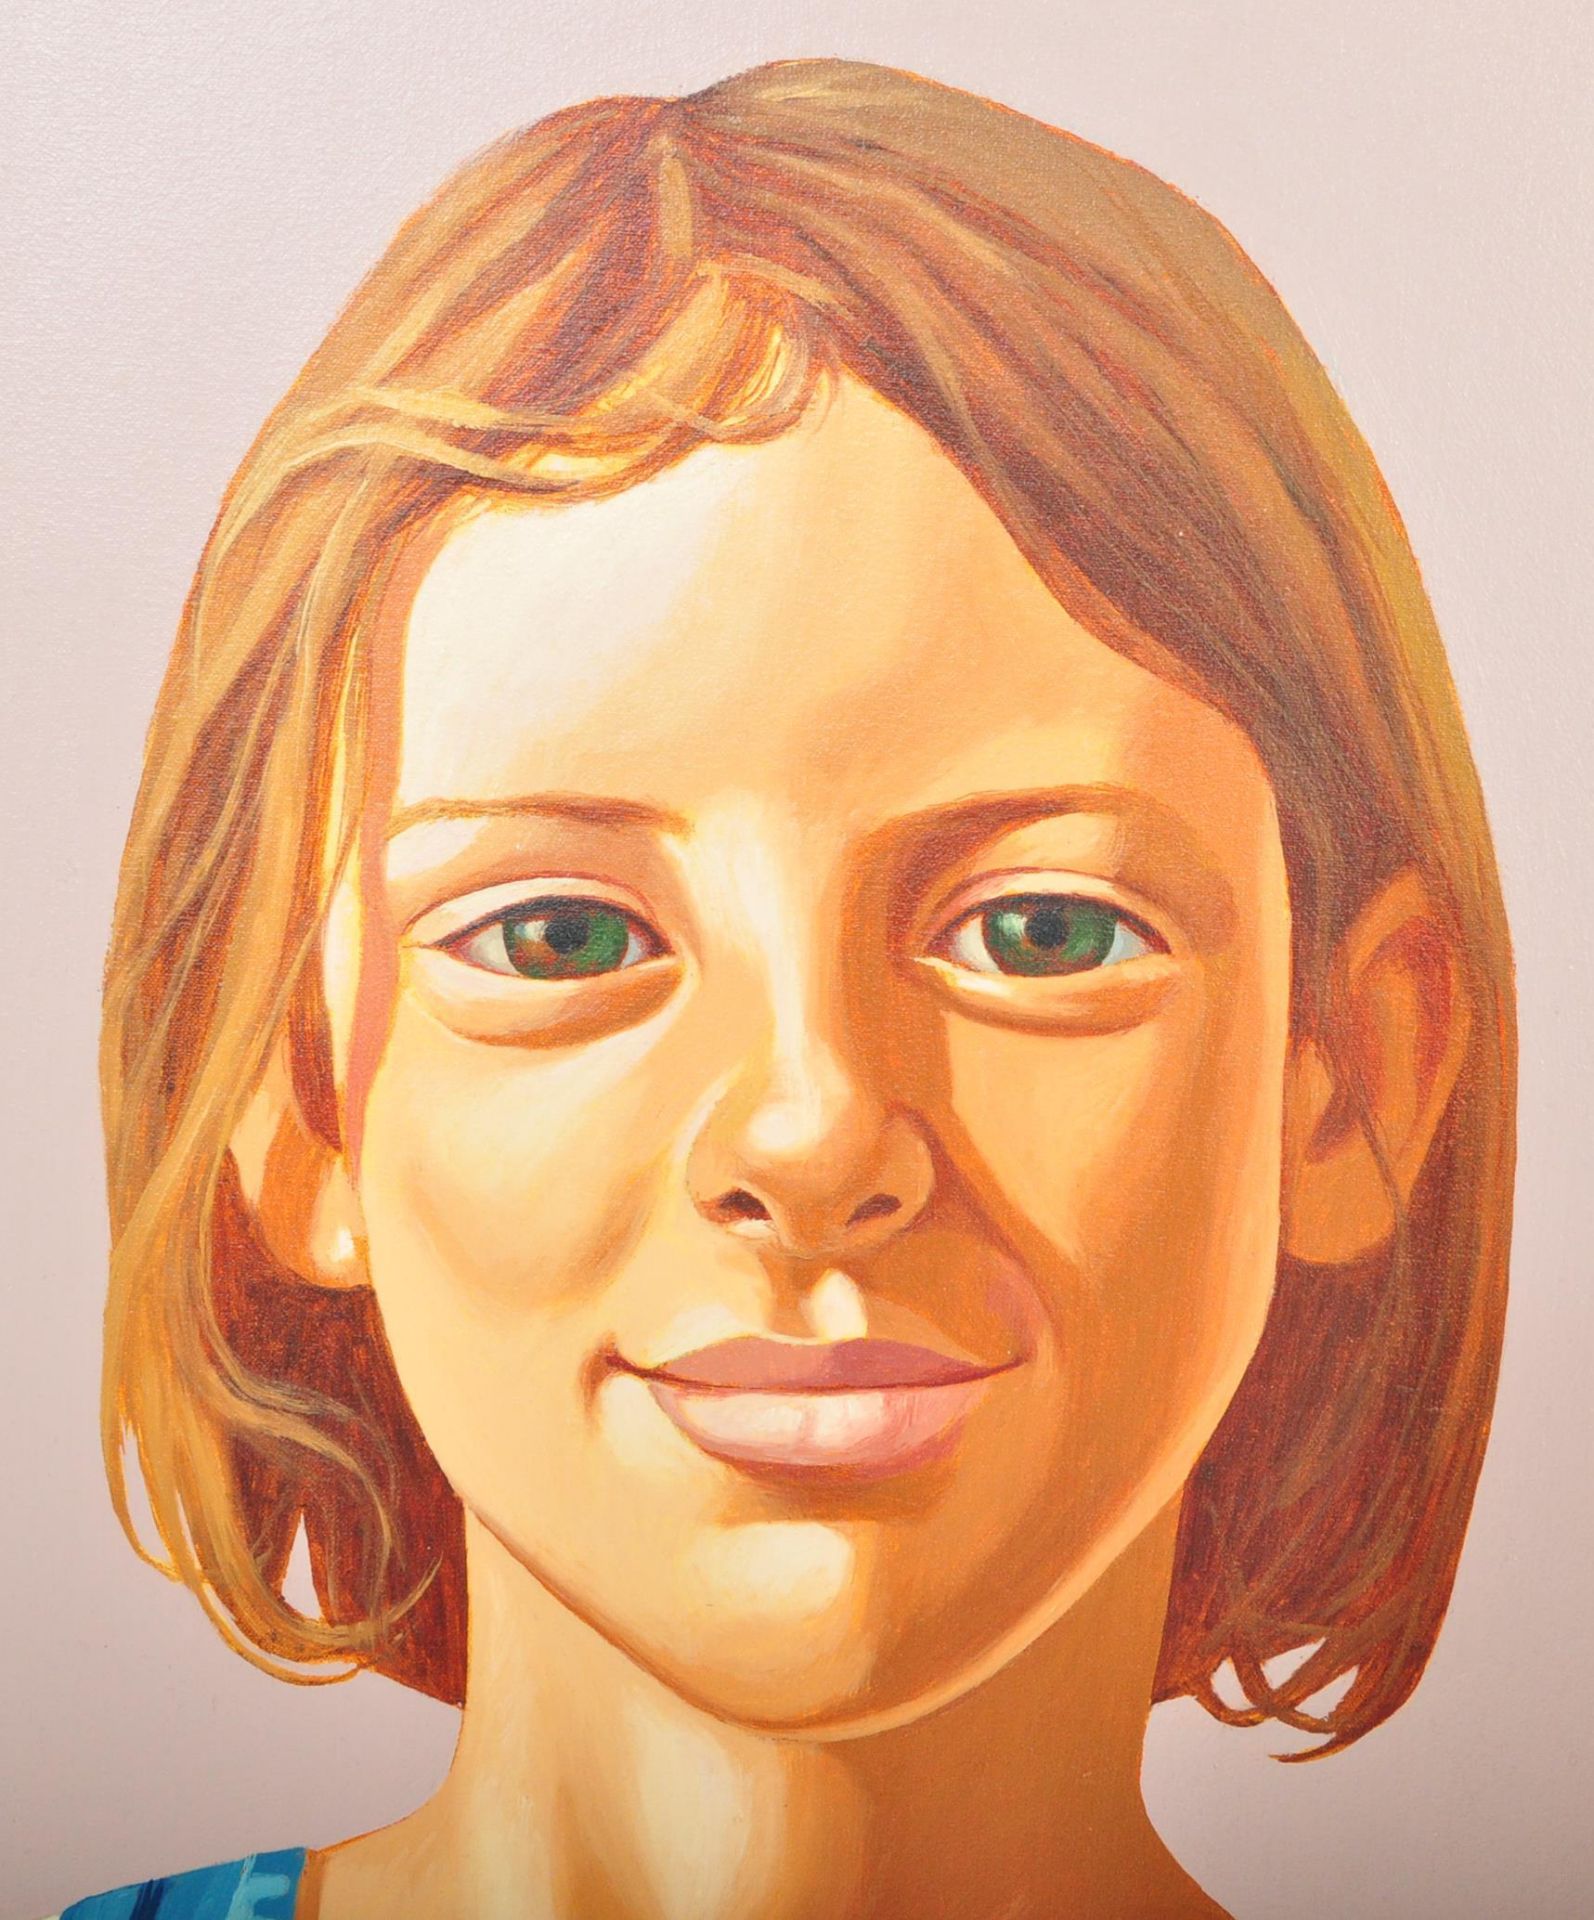 PETER BULLEN - PORTRAIT OF LILY - ACRYLIC ON CANVAS PAINTING - Image 3 of 4